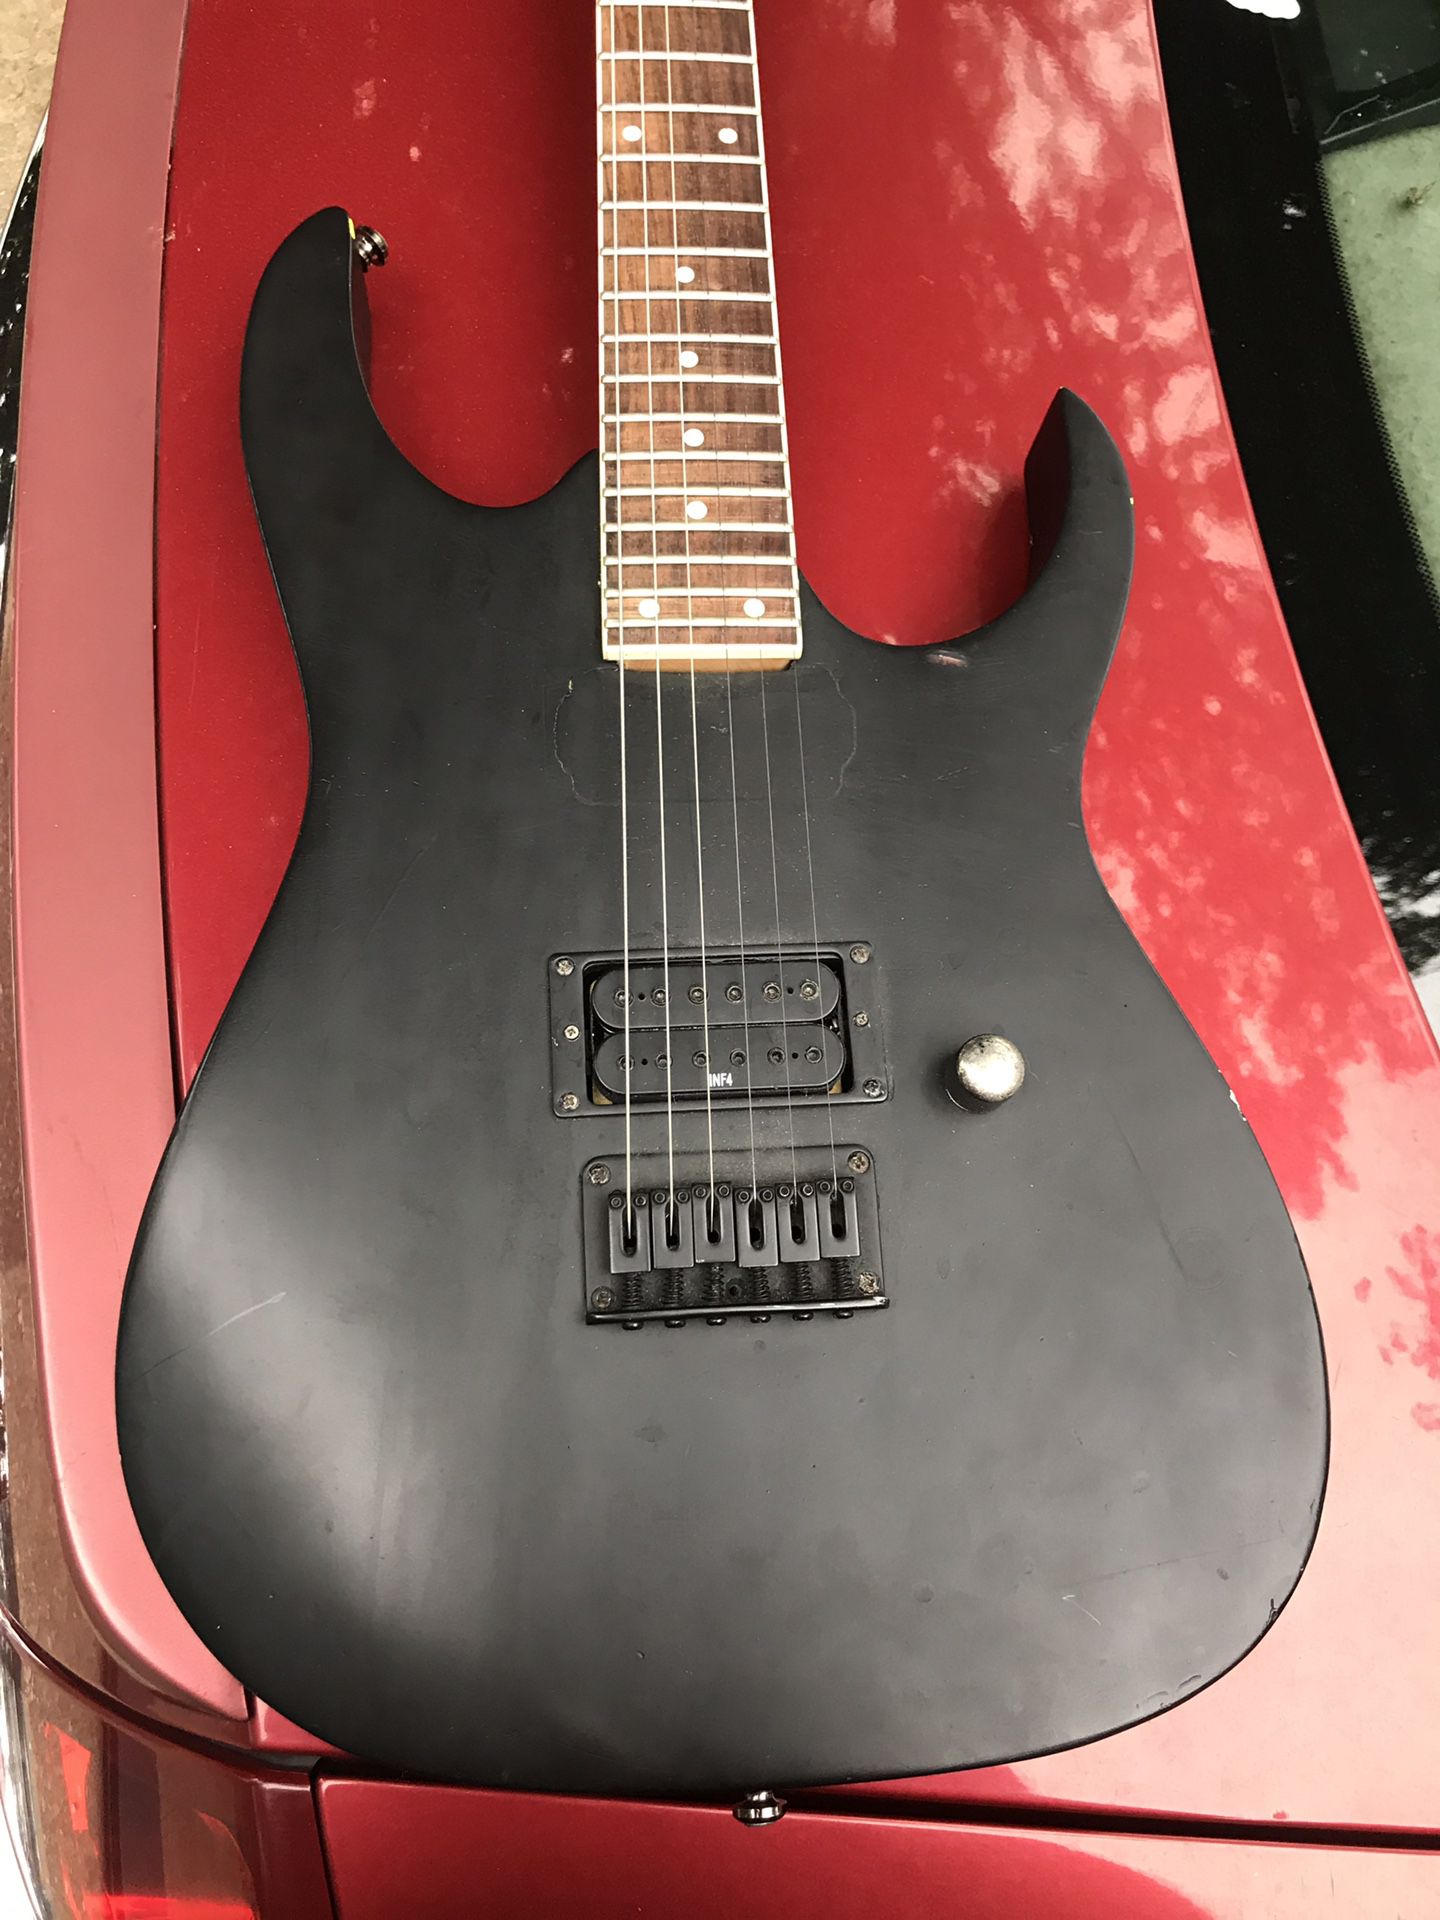 Ibanez guitar with case